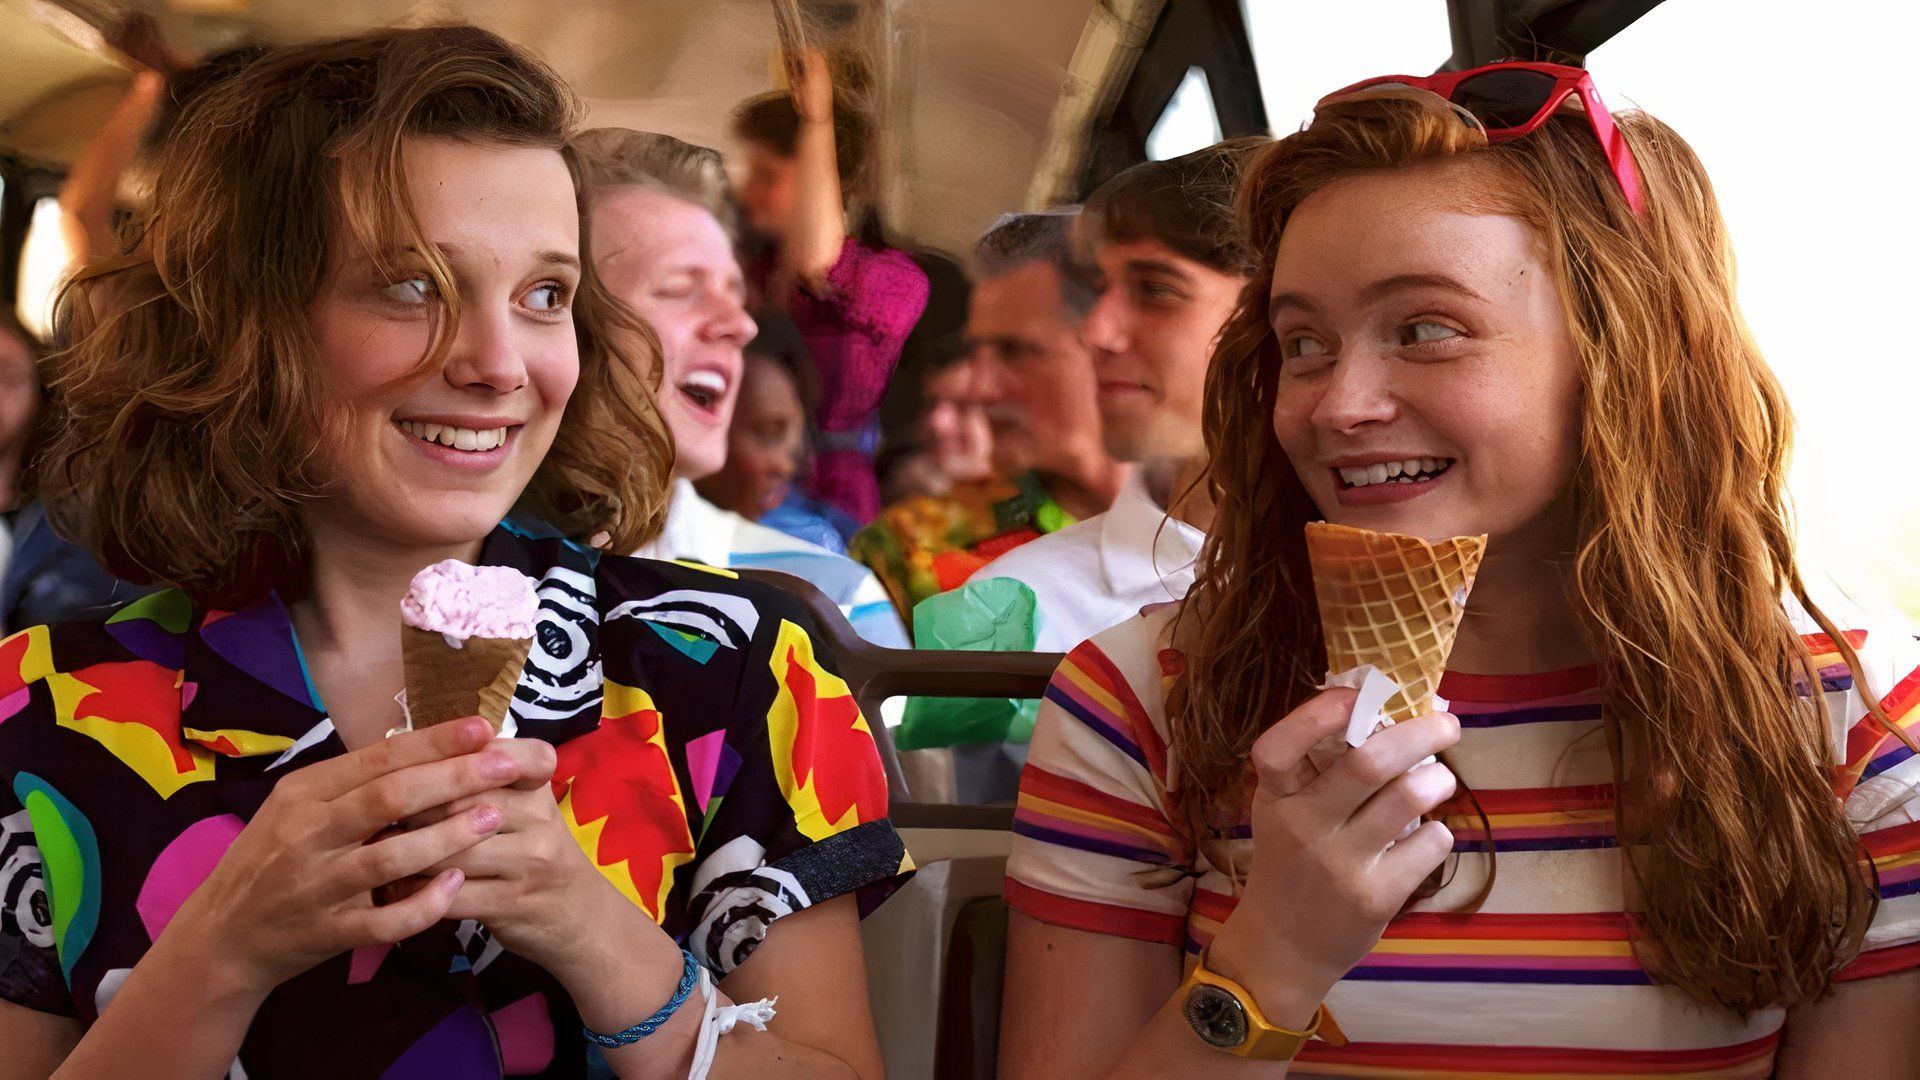 Stranger Things with Sadie Sink as Max and Millie Bobby Brown as Eleven eating ice cream on a bus